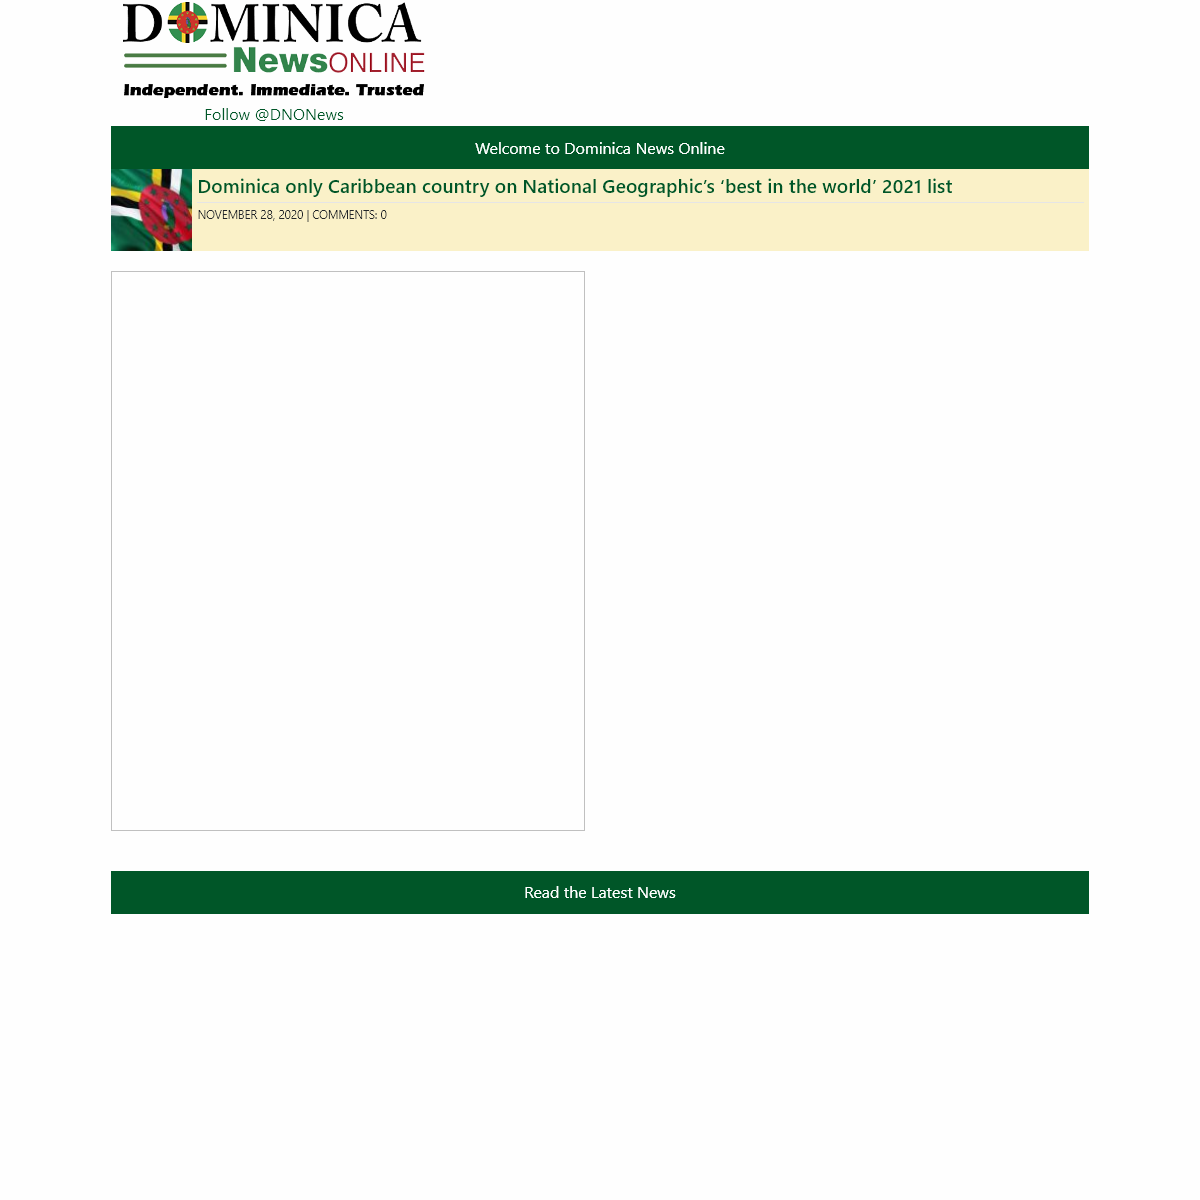 A complete backup of dominicanewsonline.com